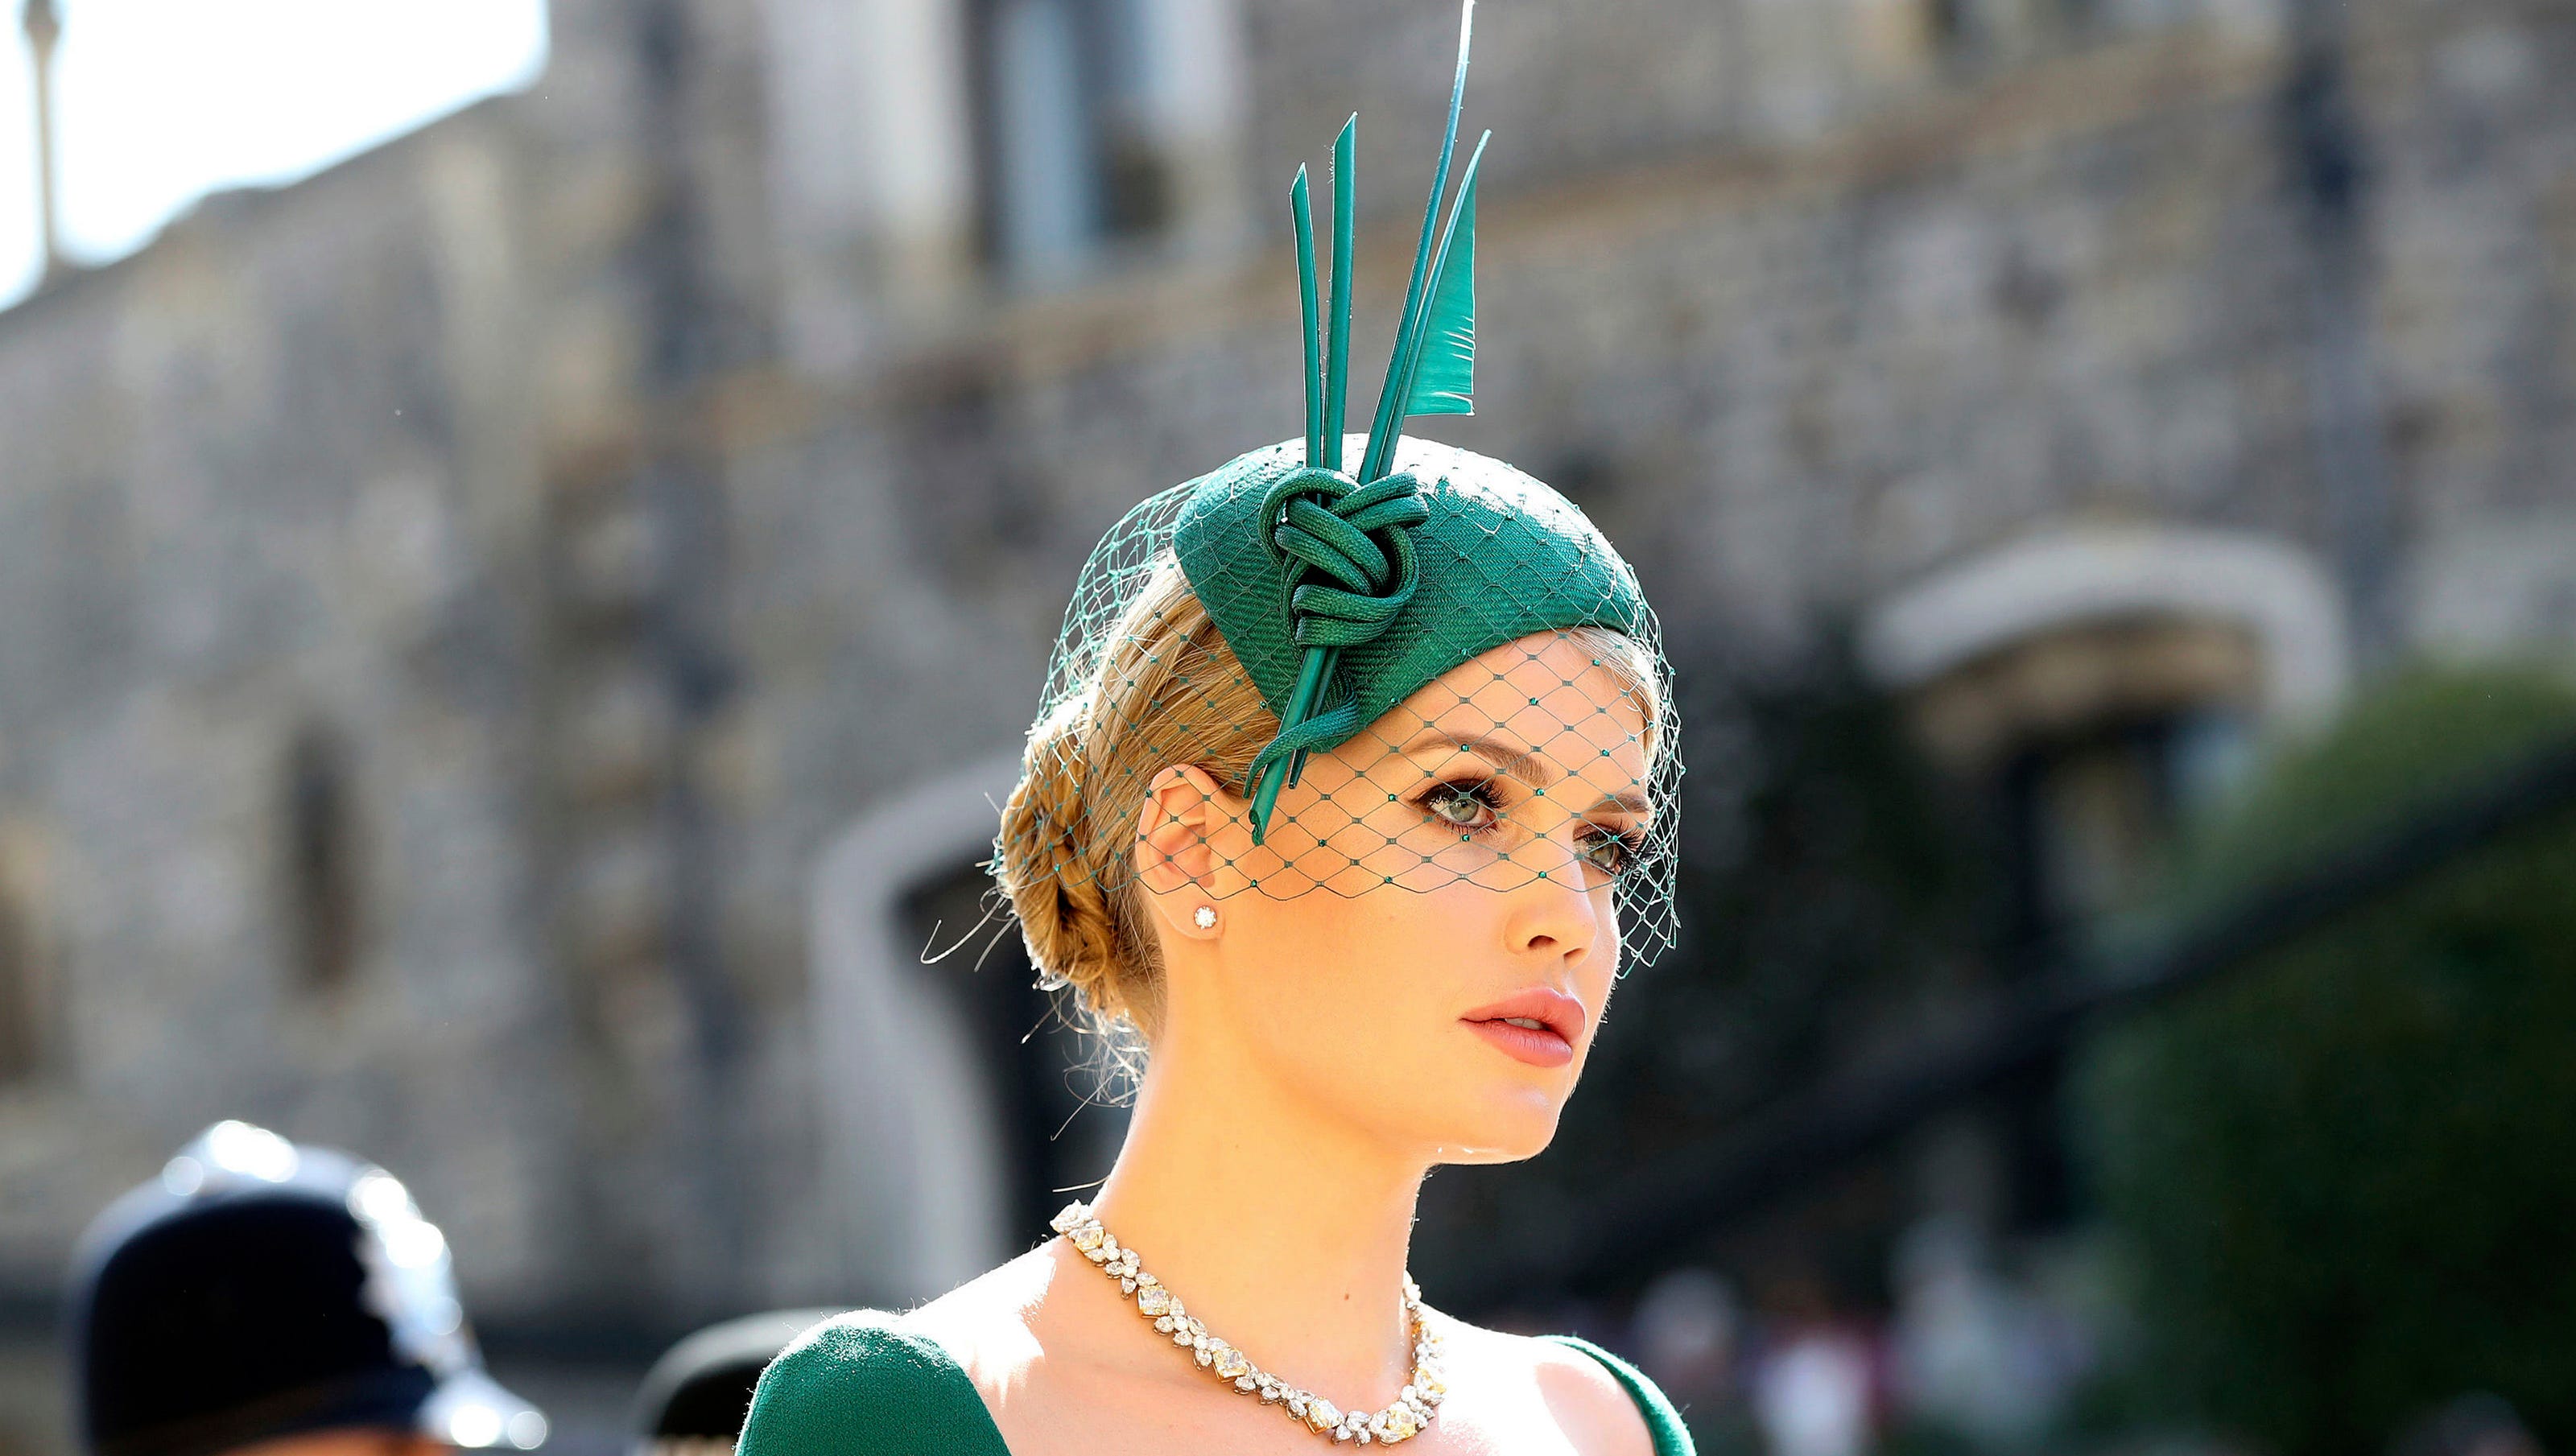 Princess Diana's niece Lady Kitty Spencer stuns in Victorian wedding gown: See the photos - USA TODAY